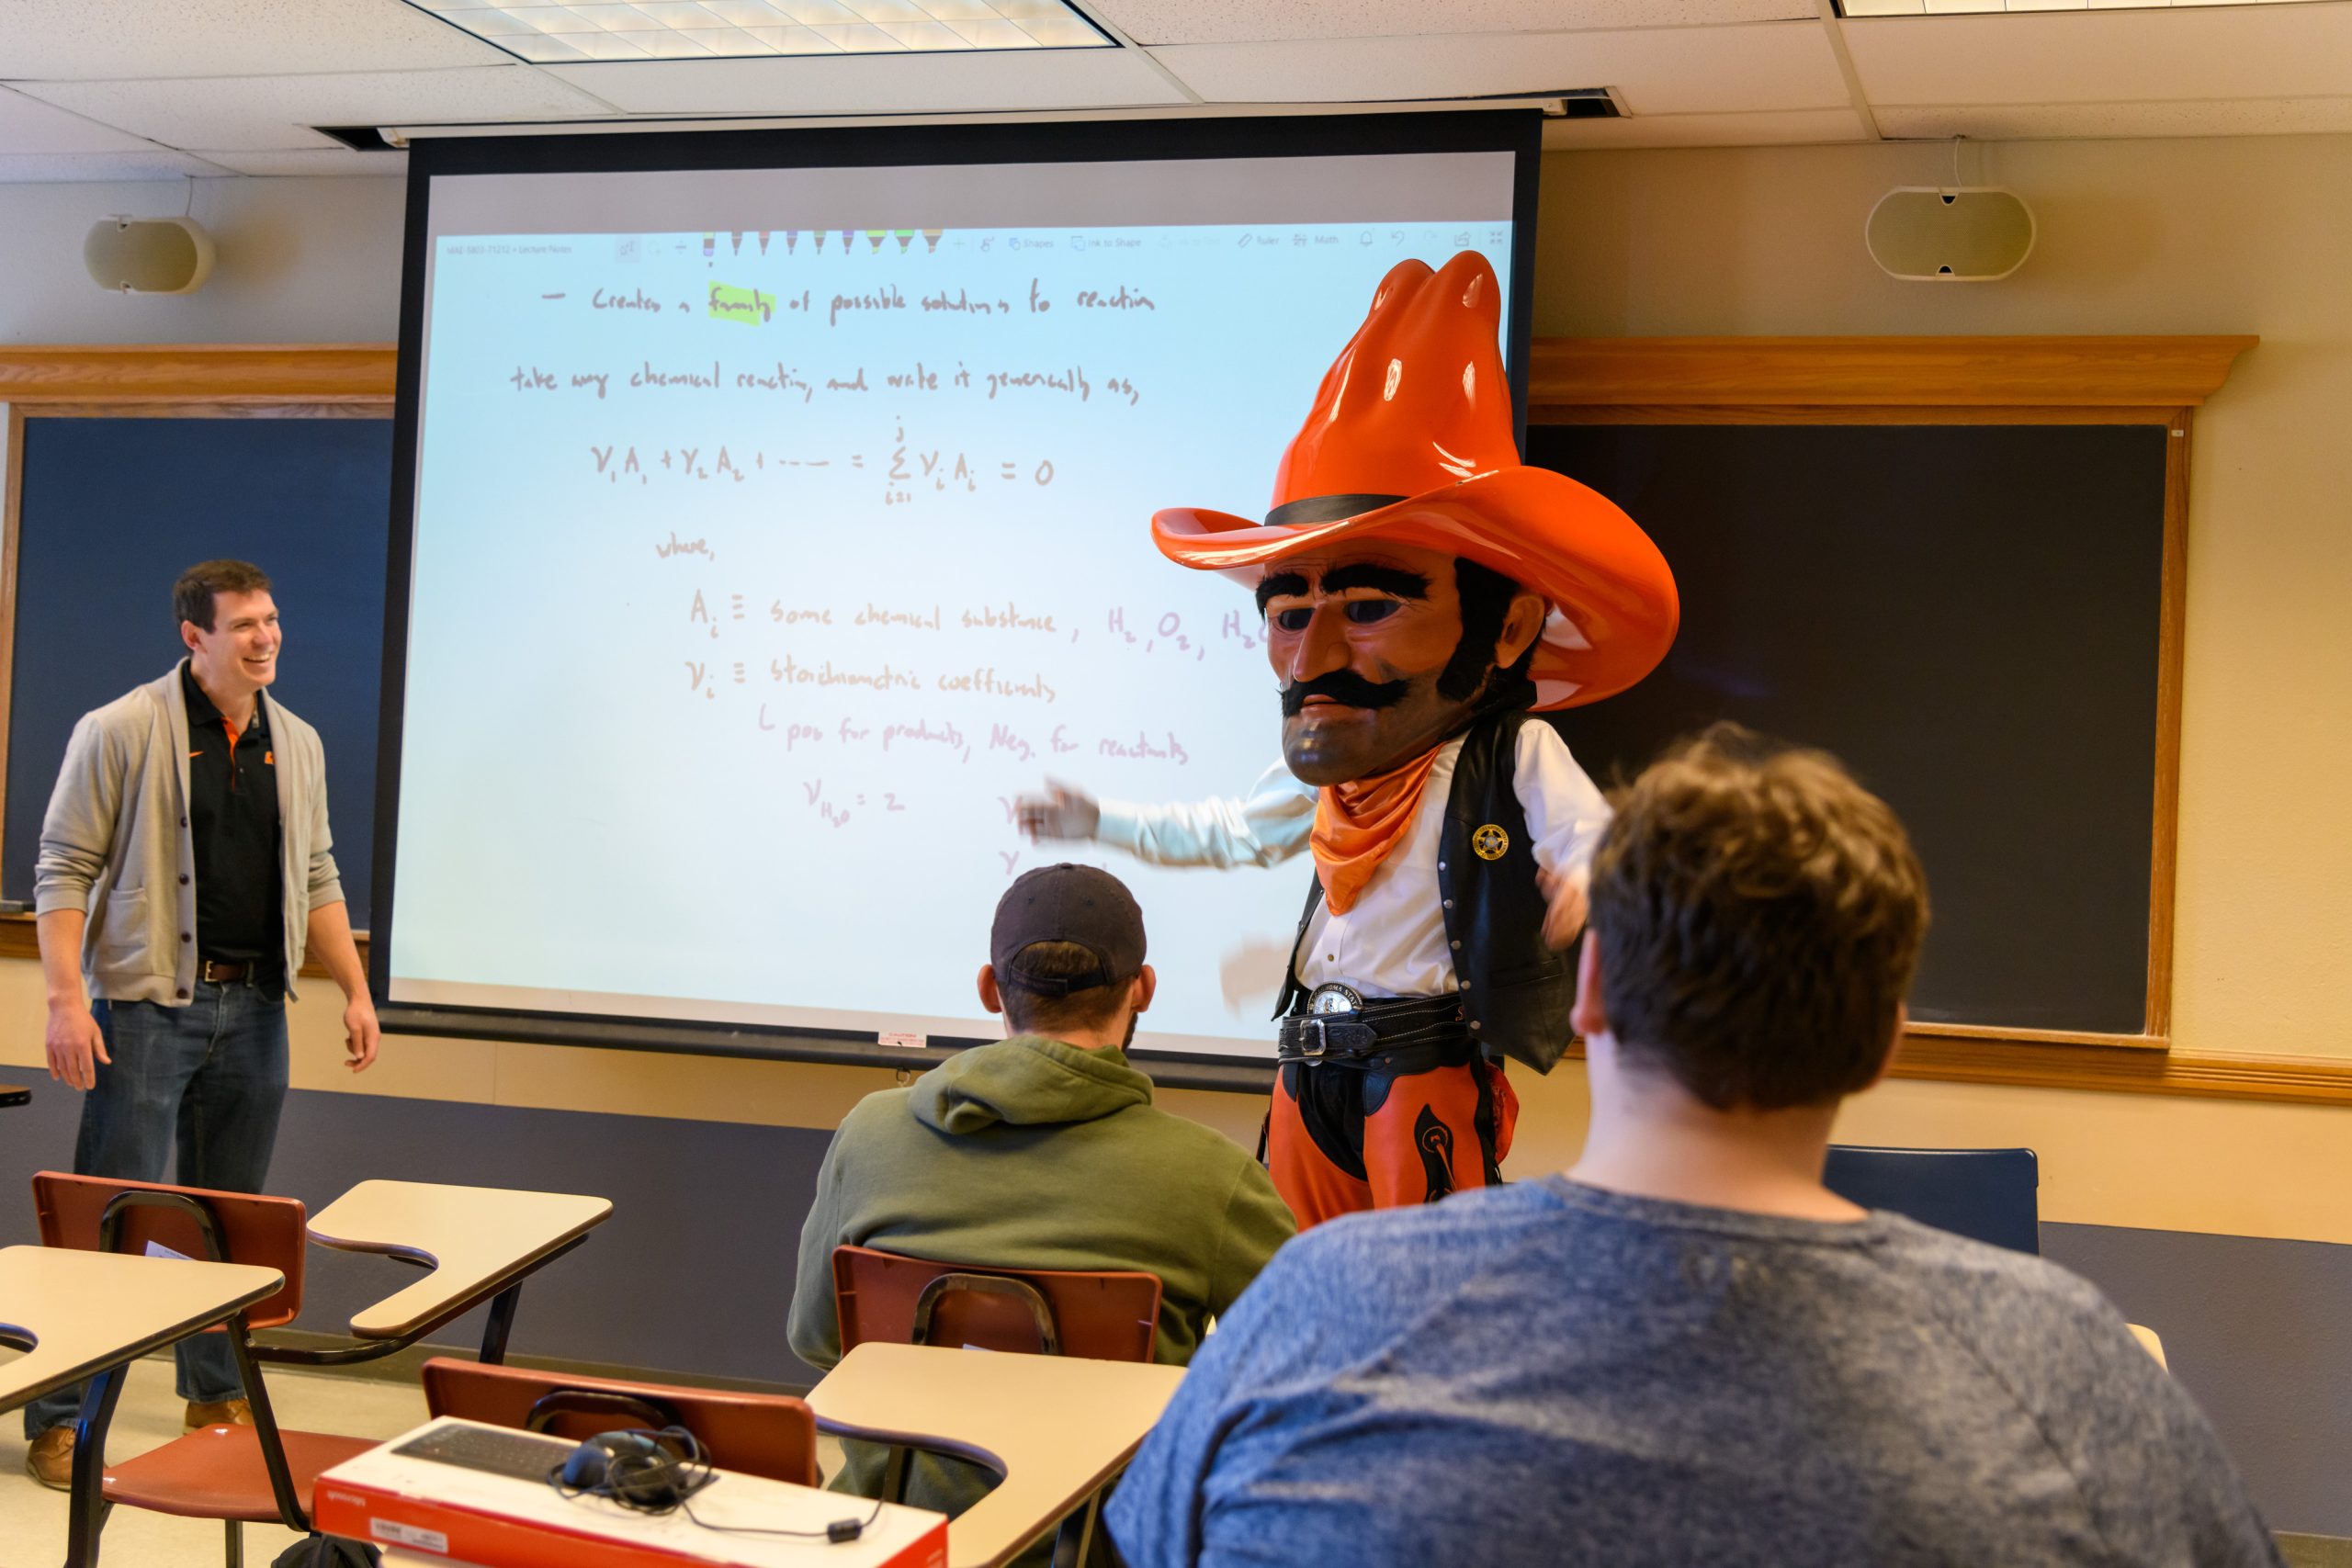 Pistol Pete stands at the front of the classroom pointing to a thermodynamics illustration on the projector screen to clarify difficult material.